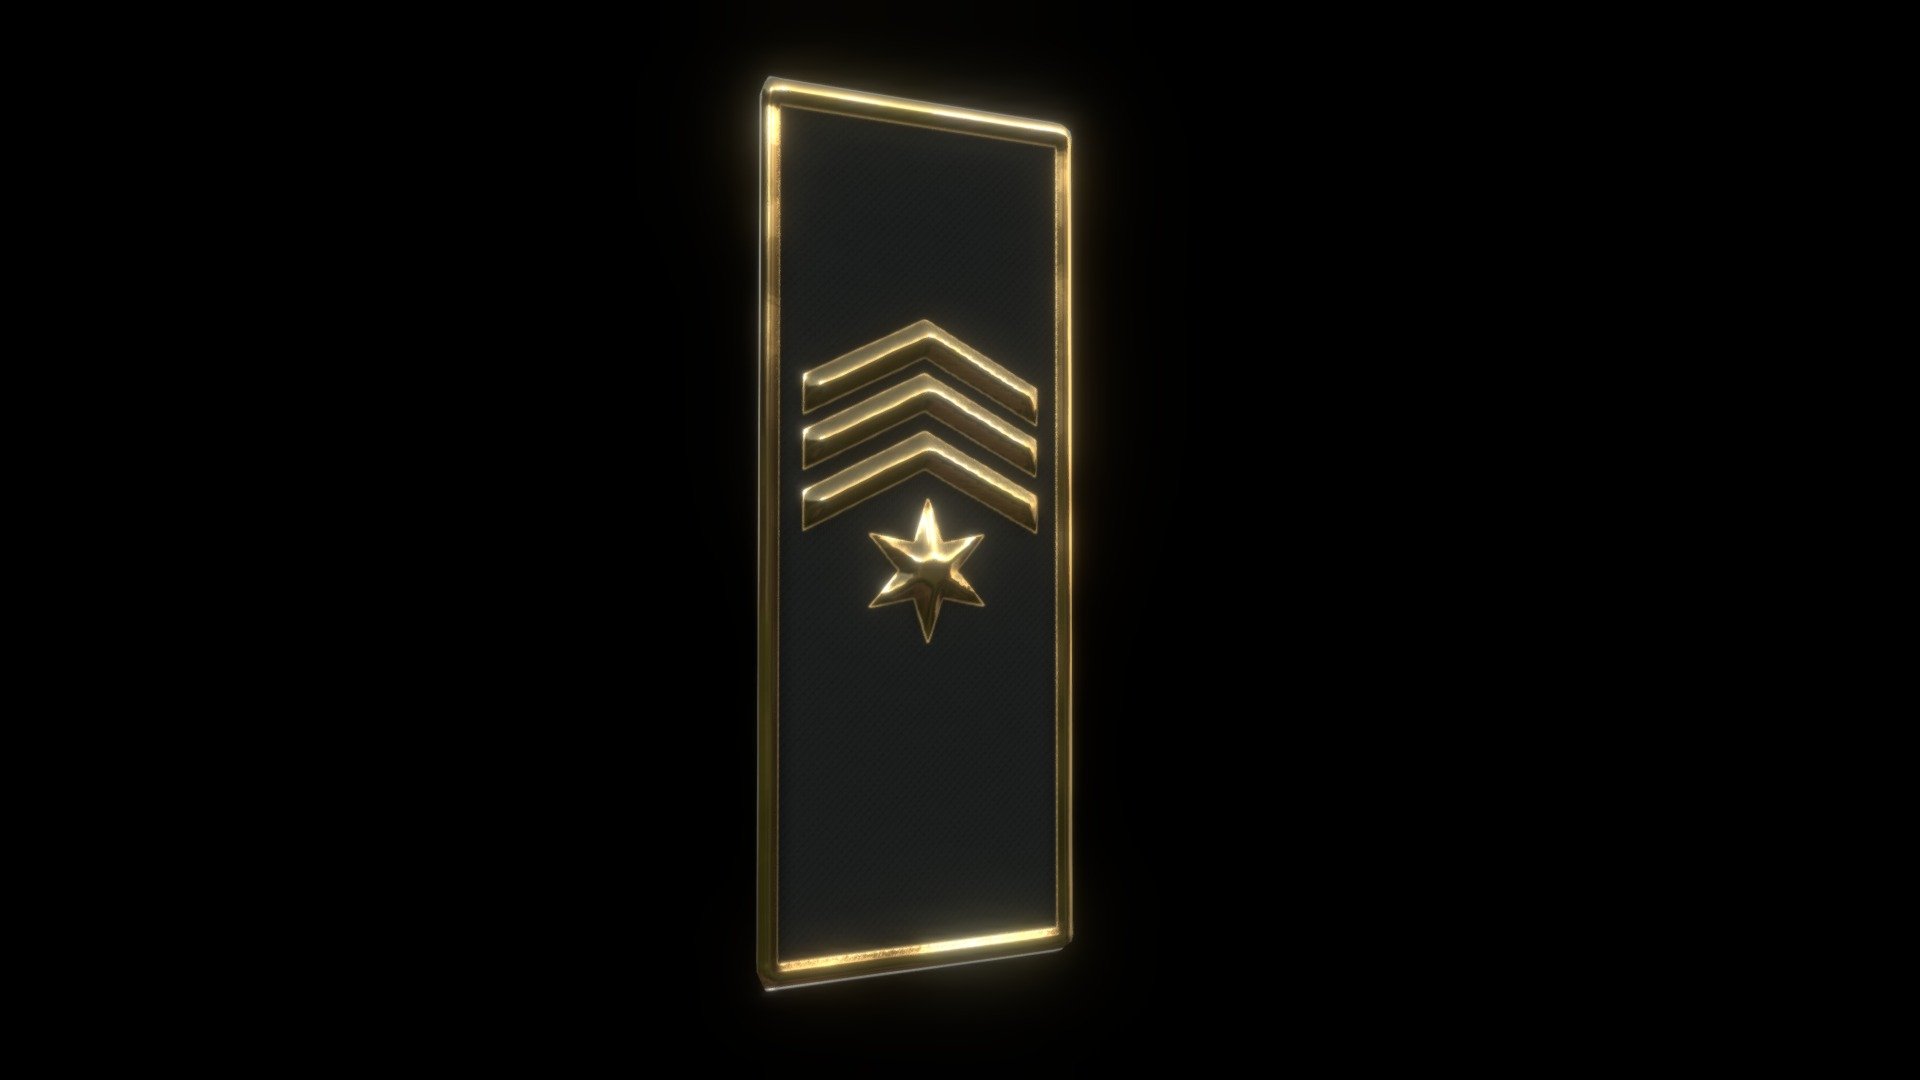 Some procedural military badges created for a Sci-Fi game. They are rendered out and used as rank icons. Quite simple, only took me about 3 hours to do from start to finish. 

They where created using Substance Designer, but honestly your betting off modelling all of the details on the badge because tesselation is not efficient. Fortuntely, I could use Paralax Occlusion to add these to an animated UI, however tesselation would have destroyed performance 3d model